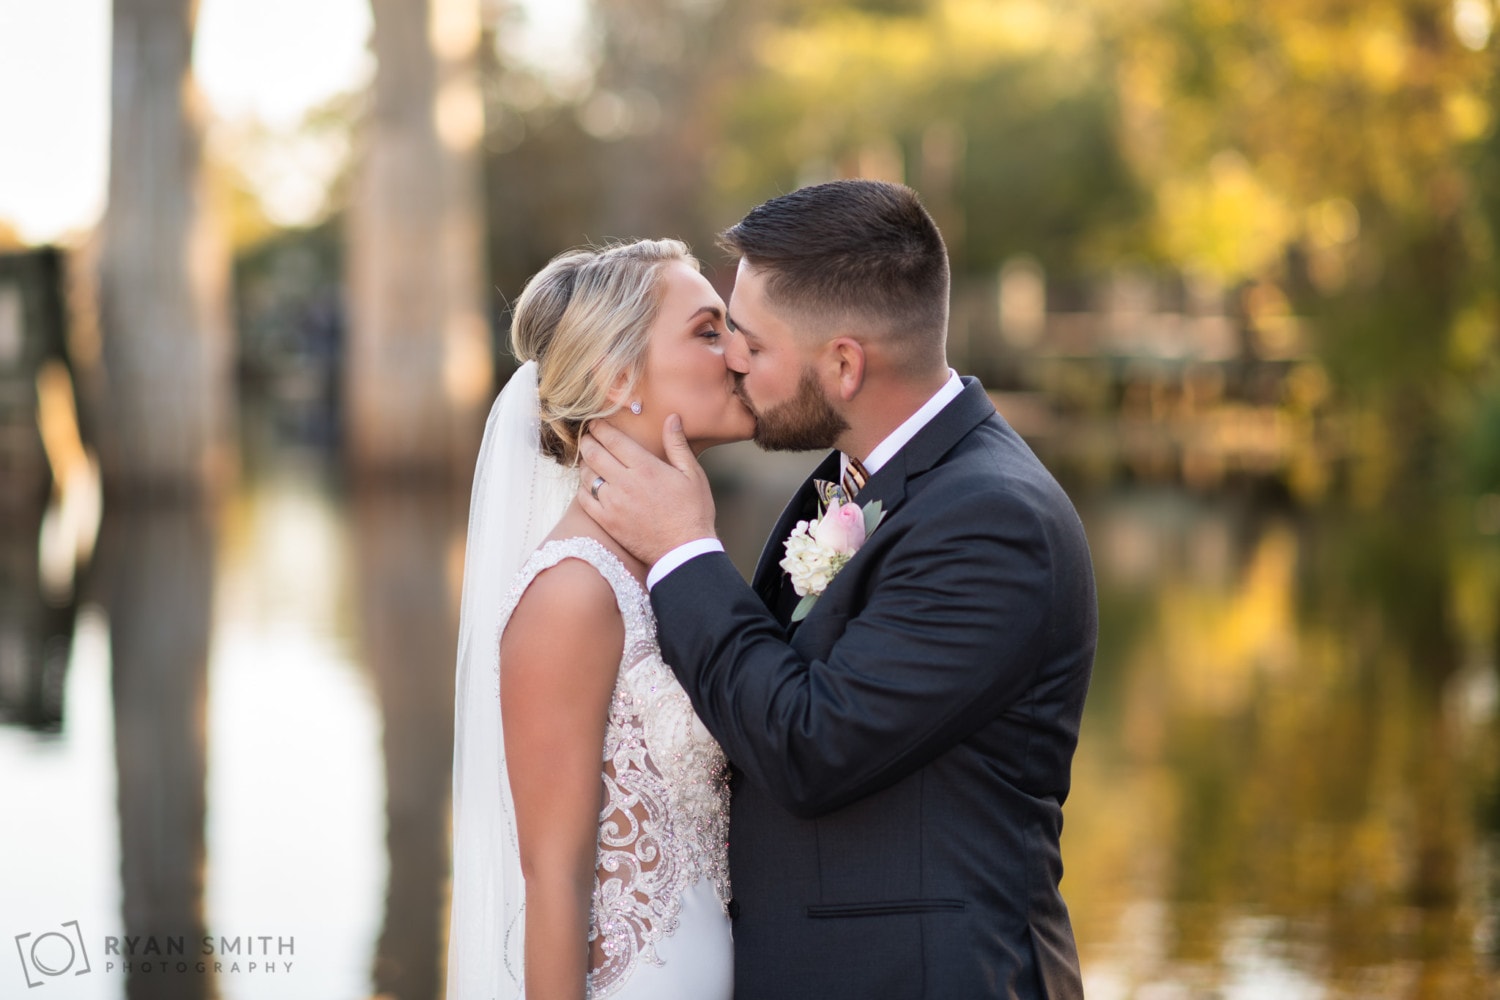 Intimate kiss with the Waccamaw River in the background - Conway River Walk